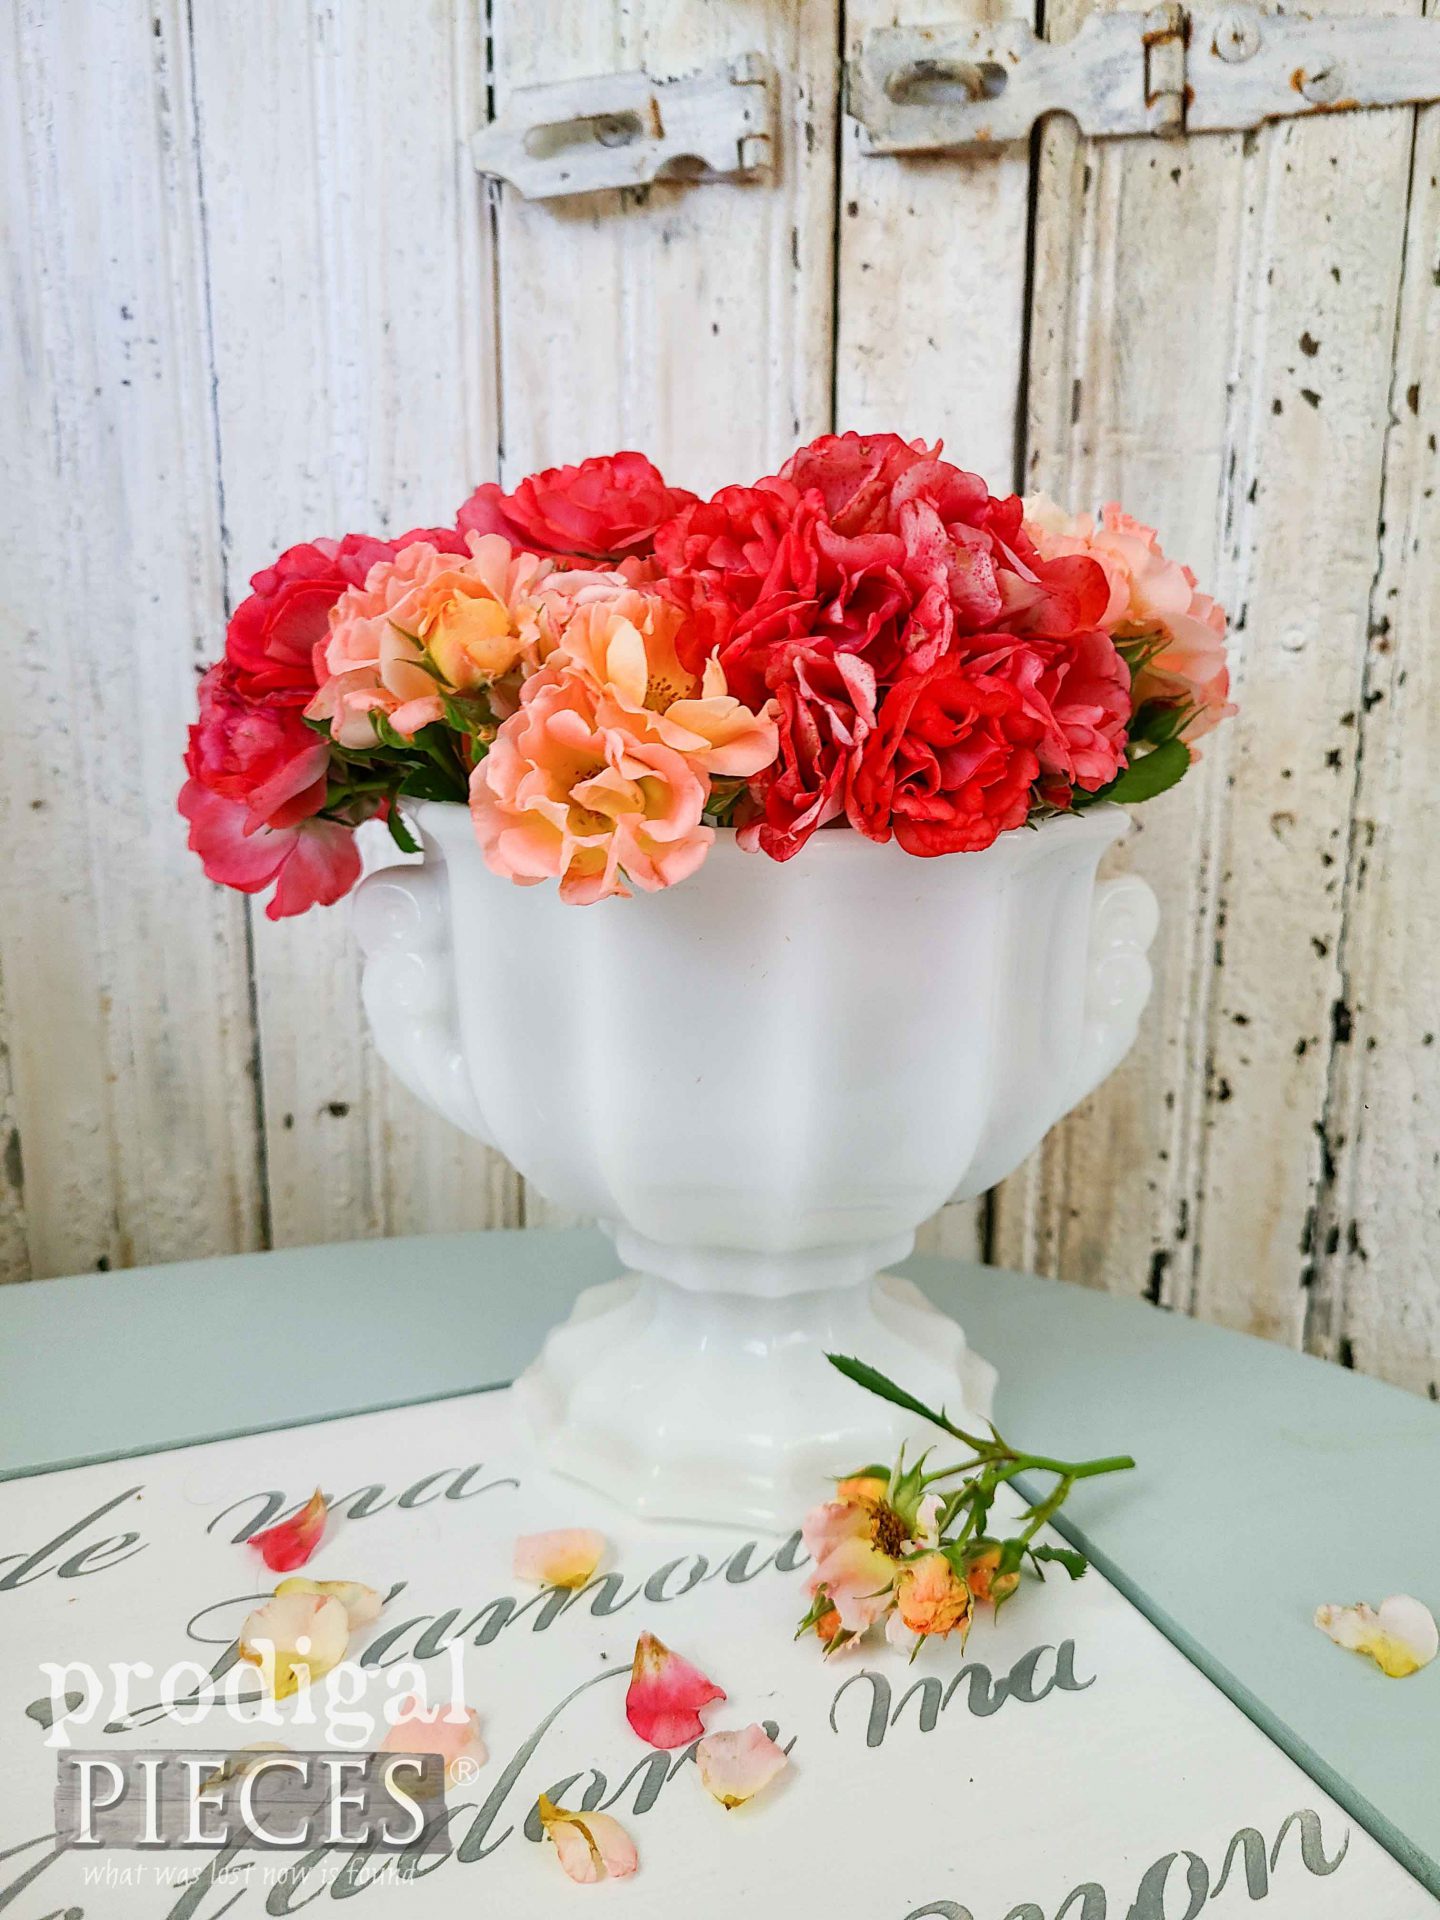 MIlk Glass and Roses by Larissa of Prodigal Pieces | prodigalpieces.com #prodigalpieces #roses #vintage